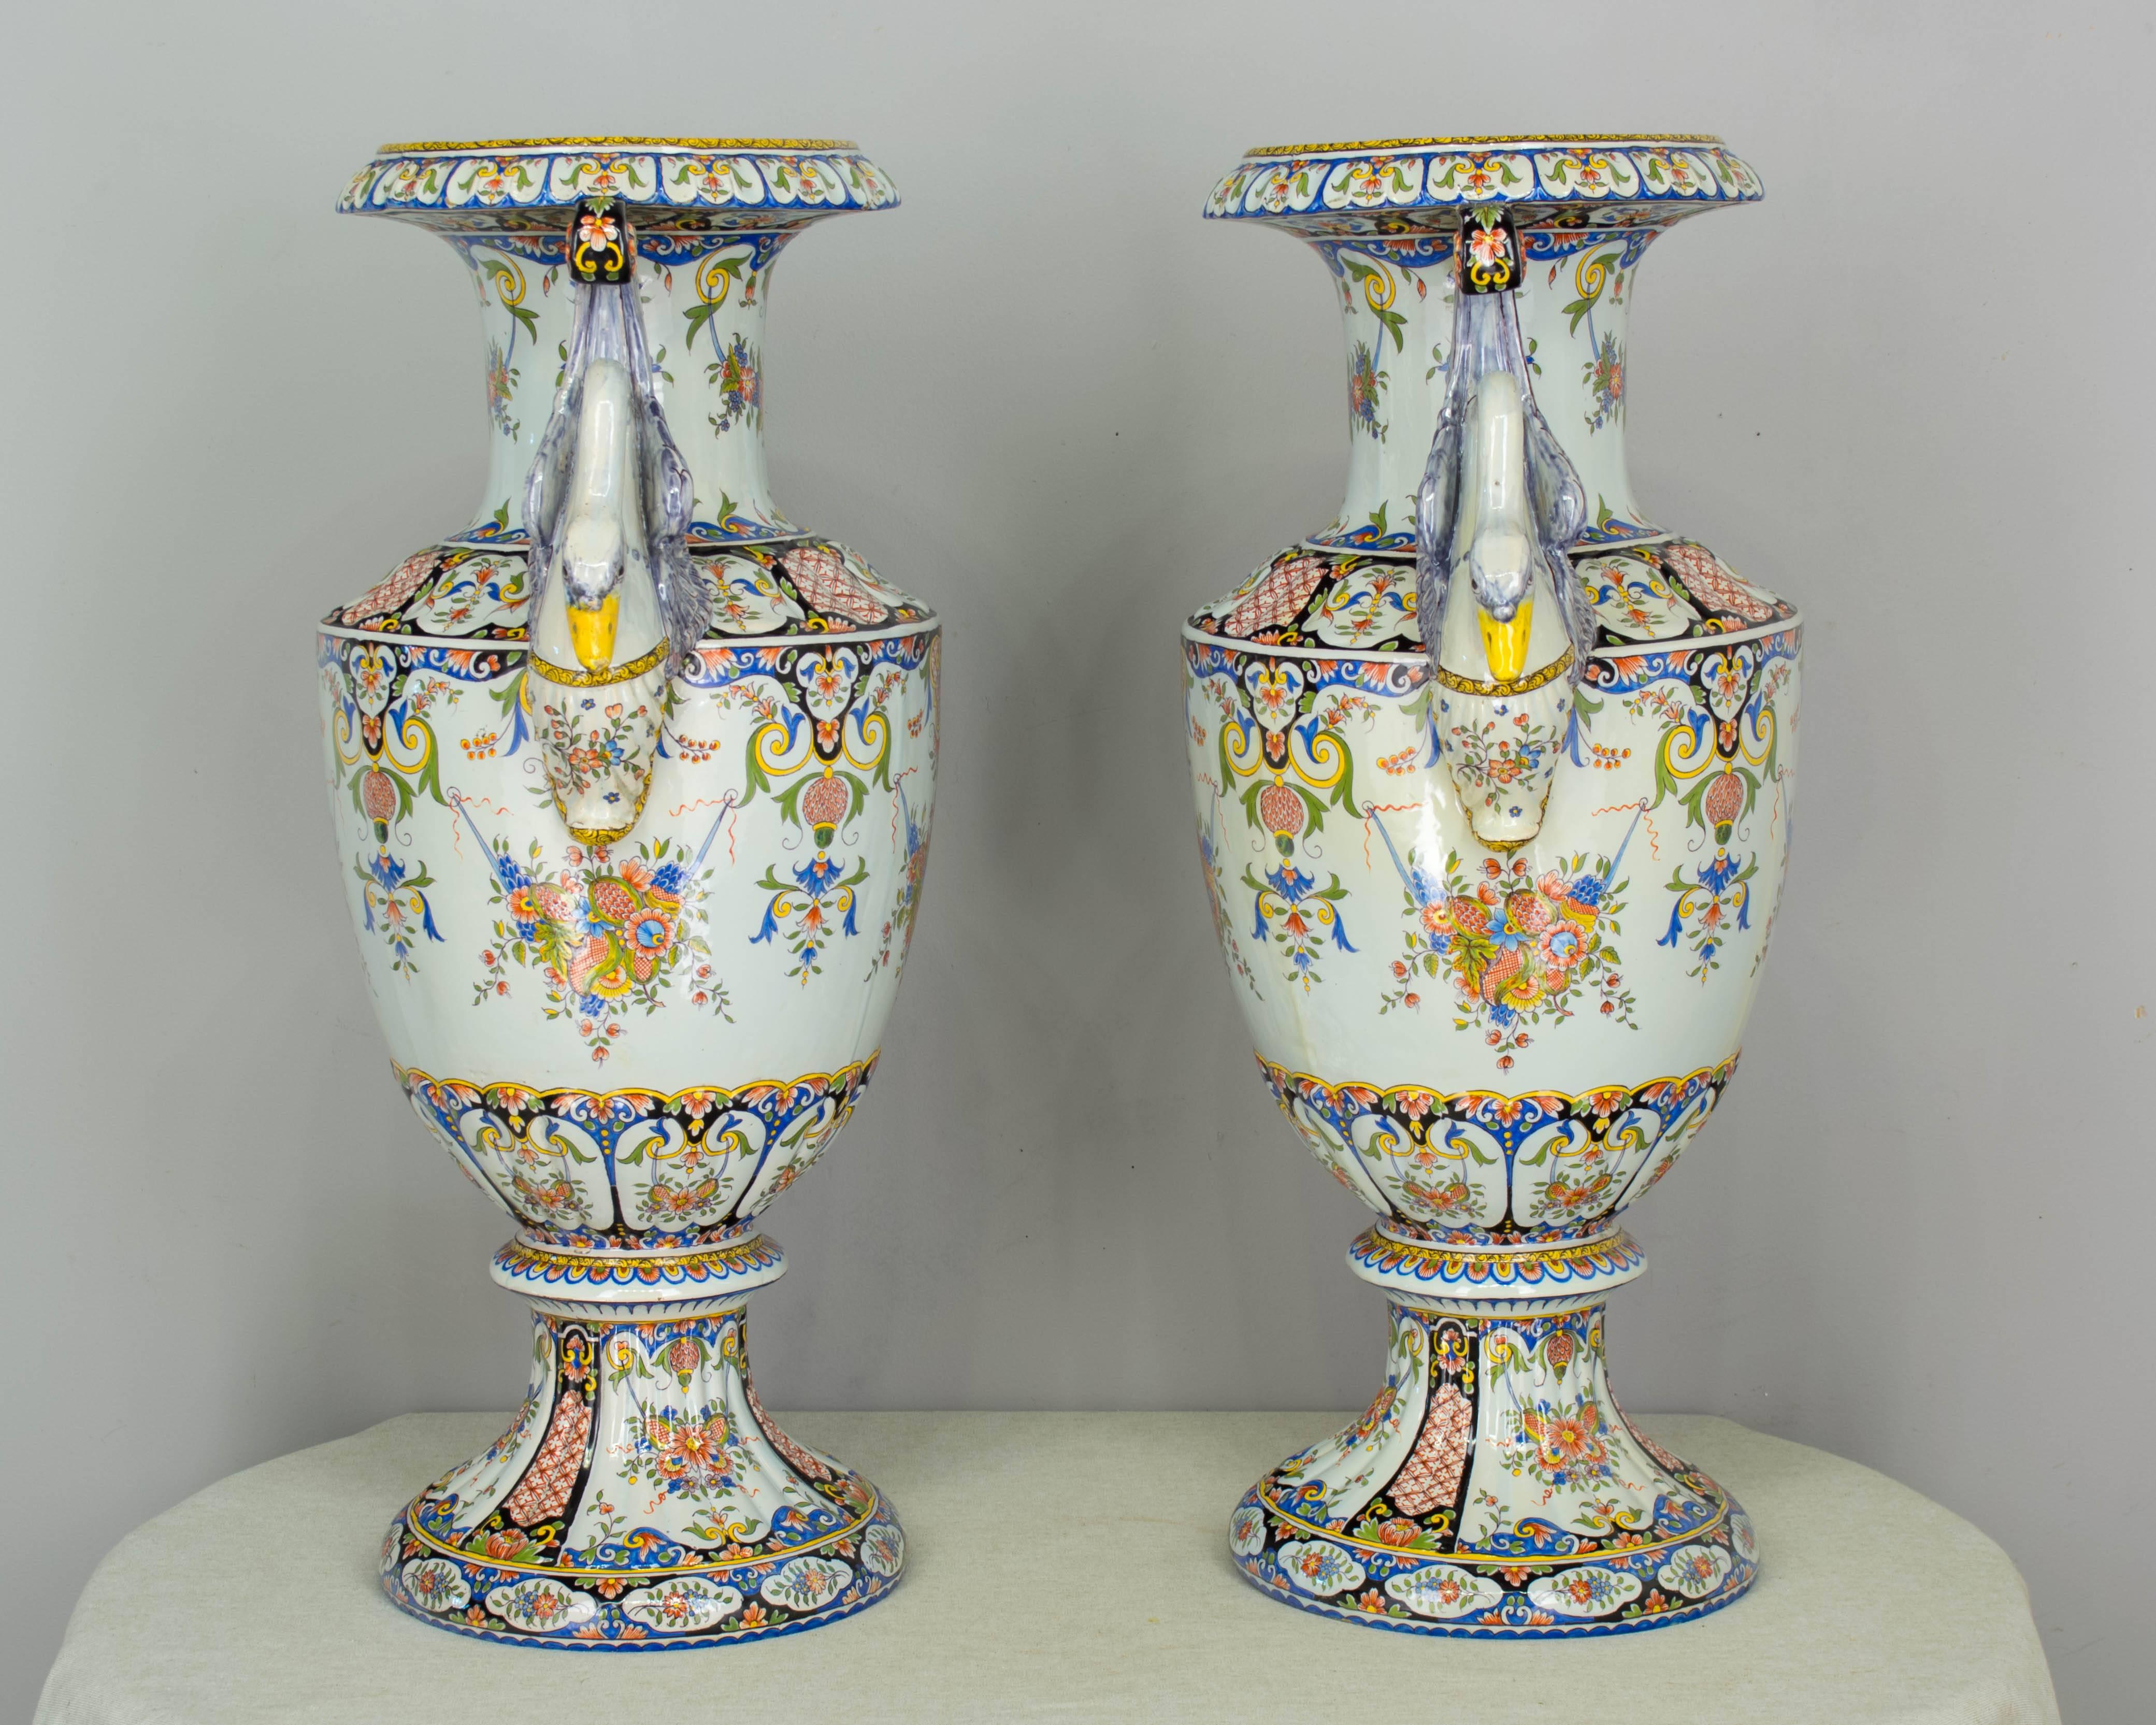 Ceramic Pair of Large 19th Century French Faience Urns